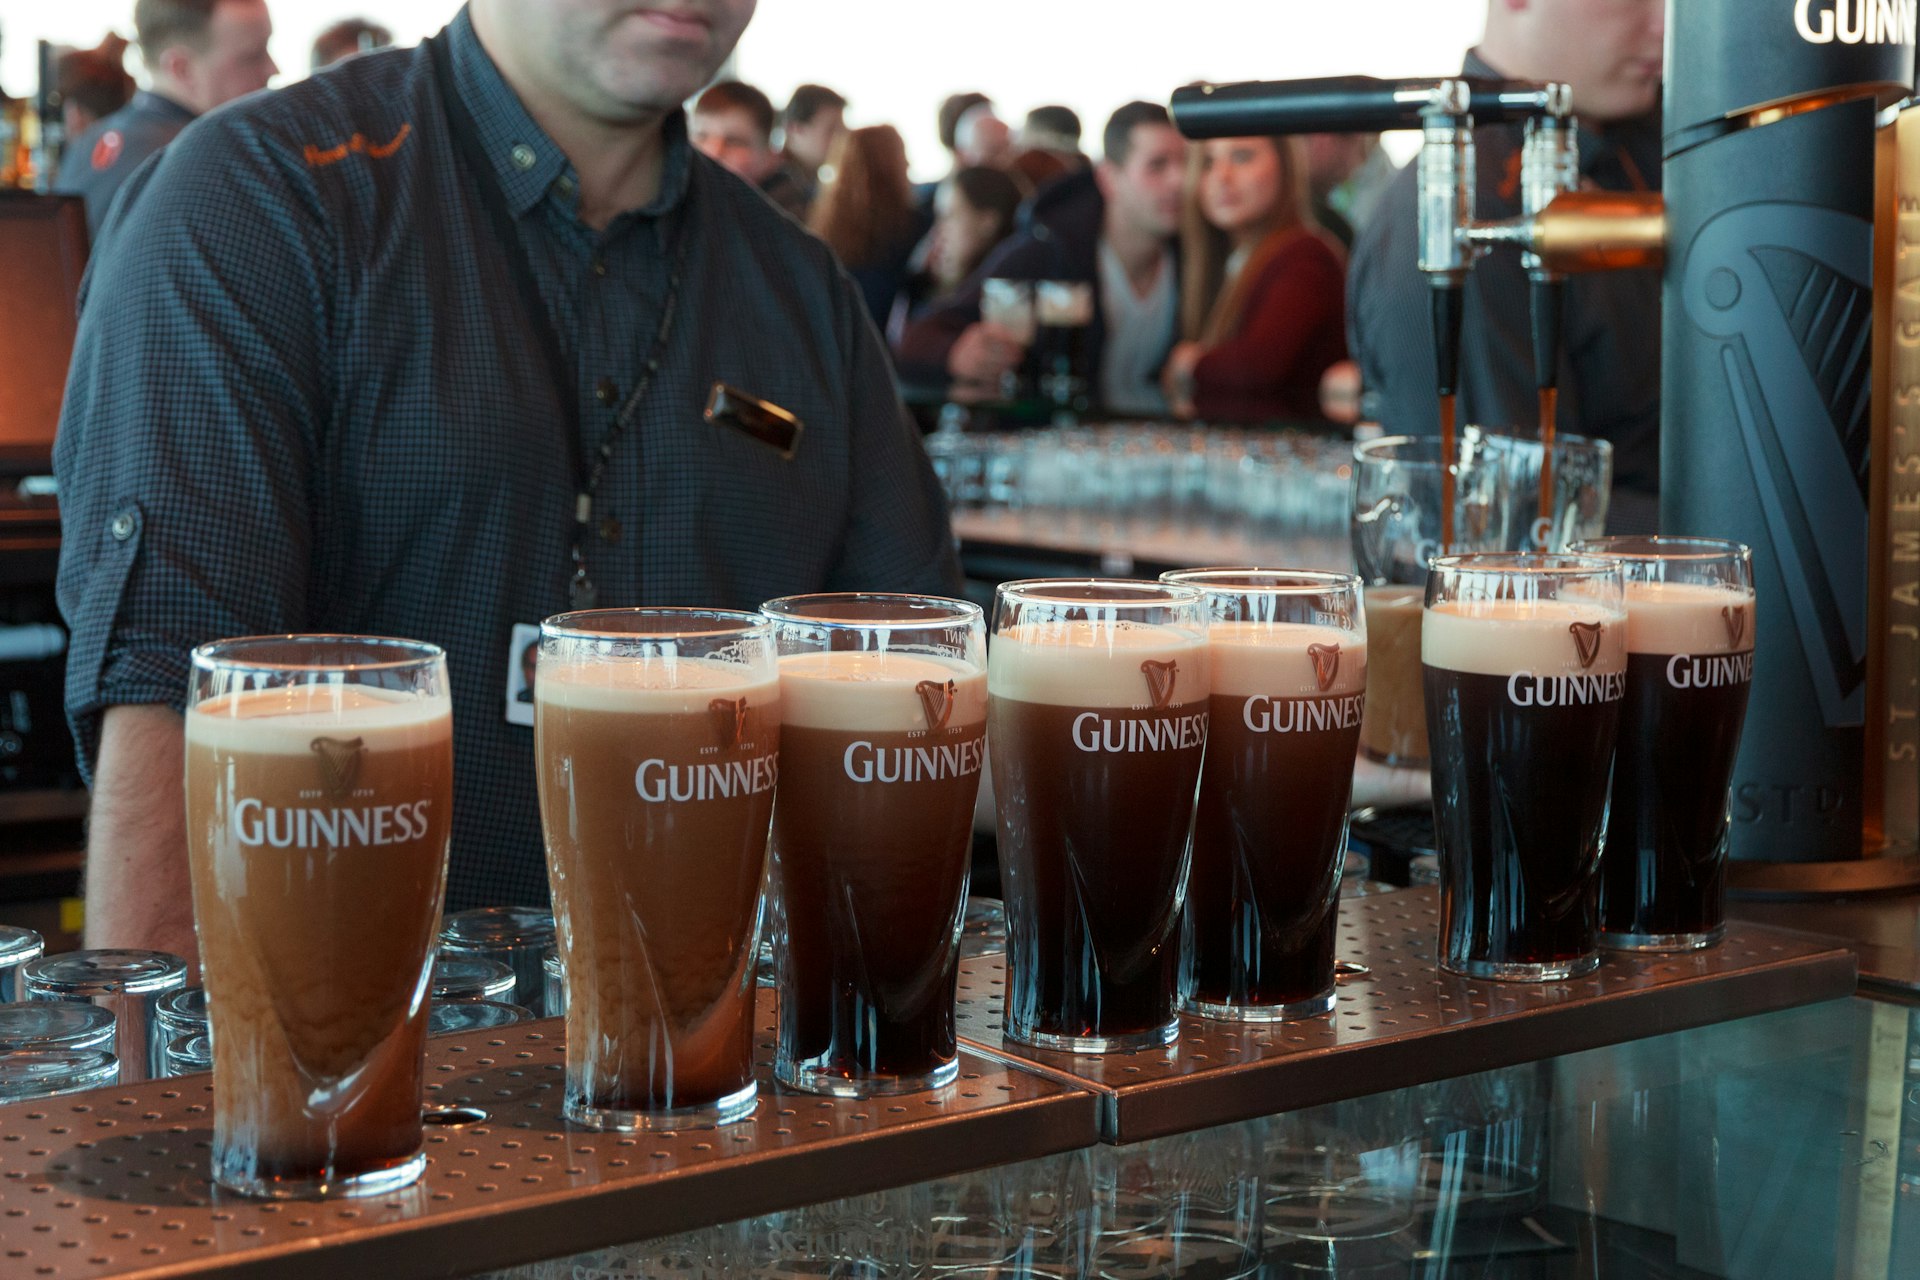 Several pints of Guinness lined up along a bar, at various stages of “settling“